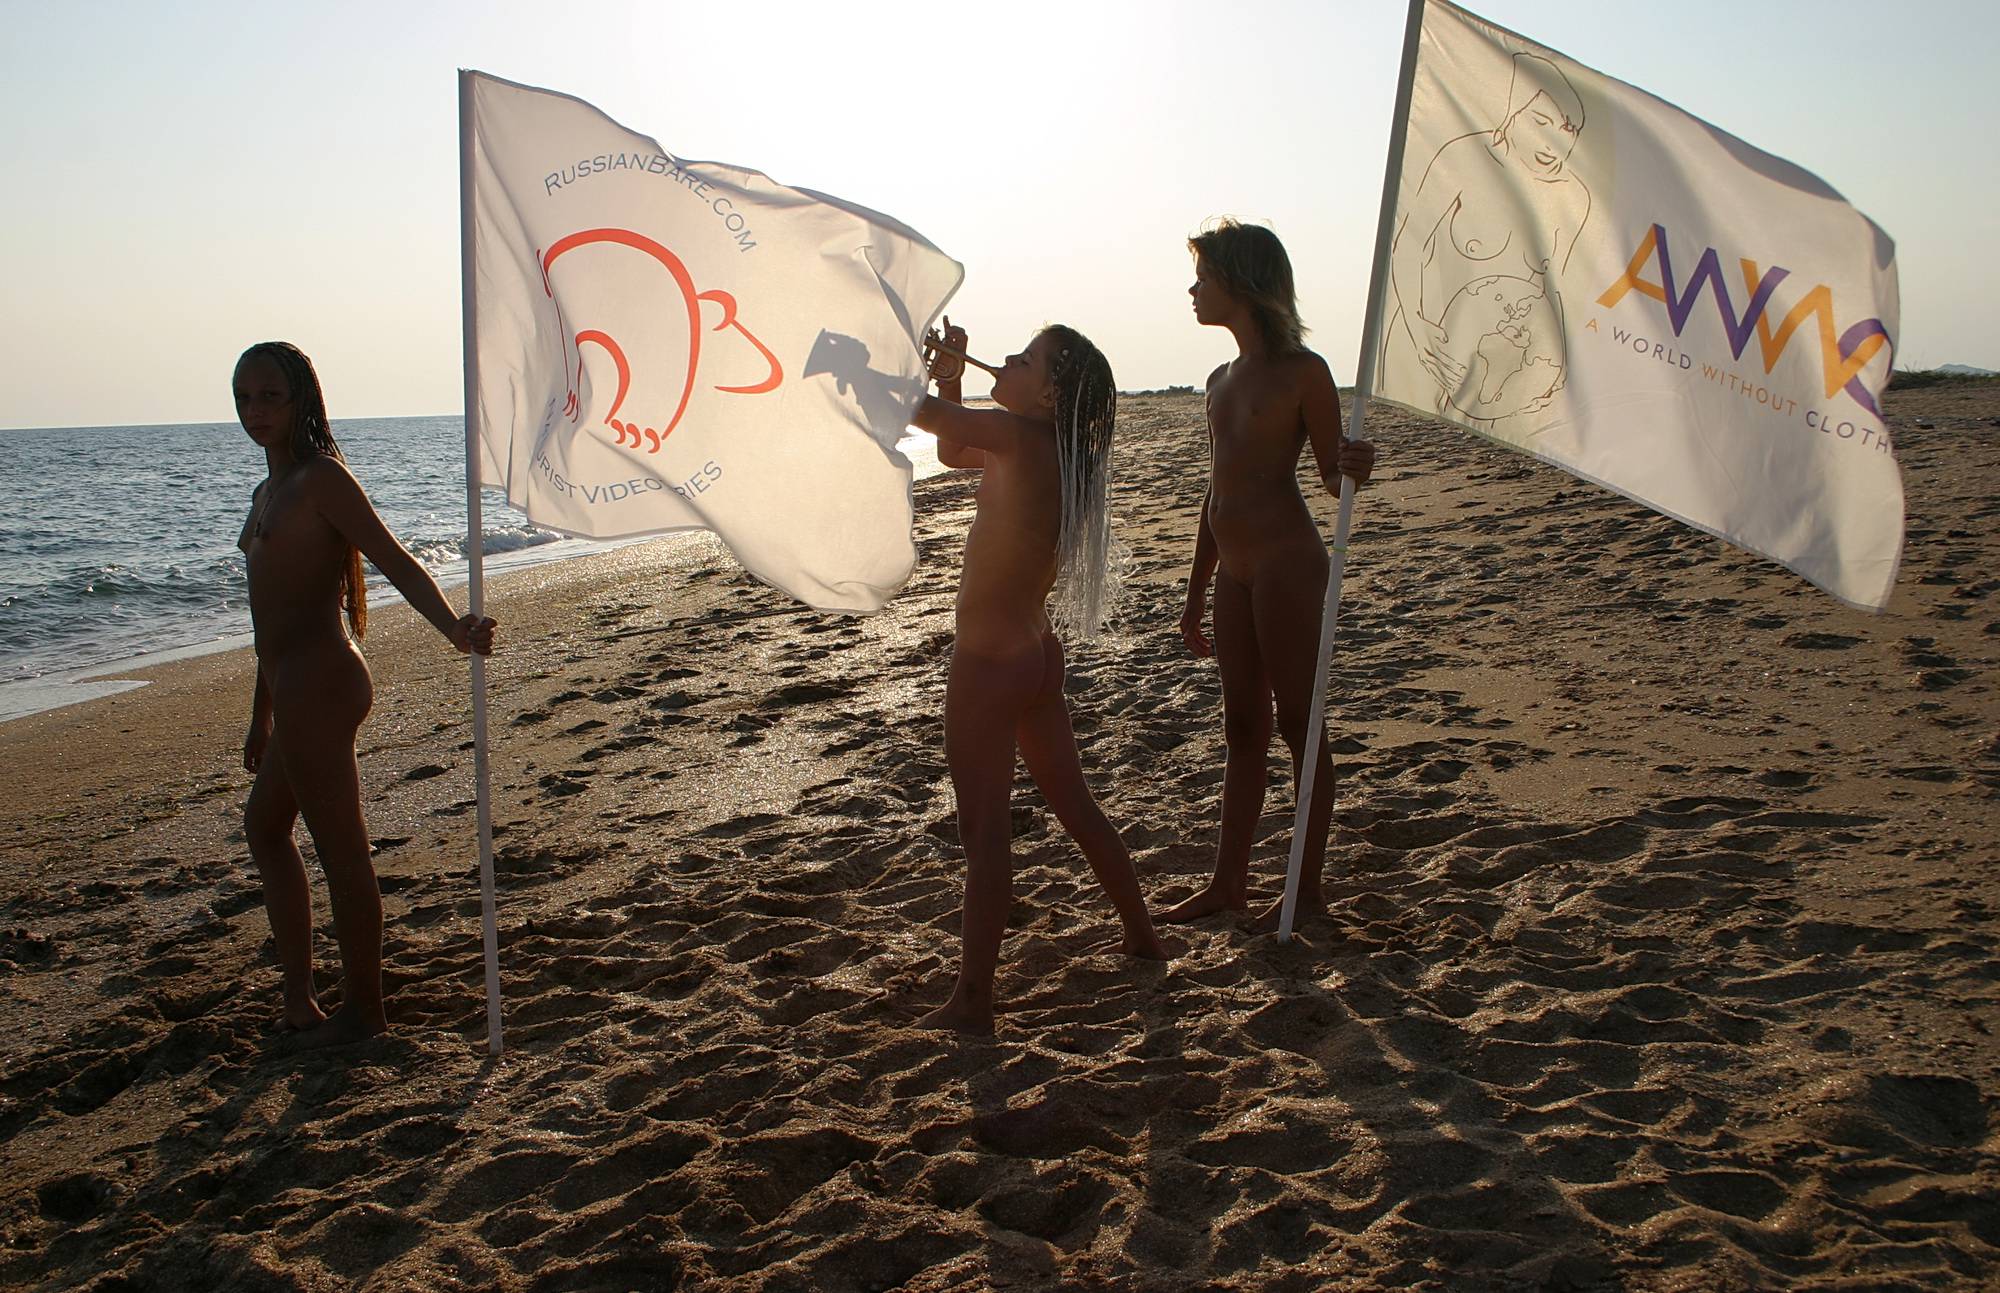 Pure Nudism-United We Are With Flags - 3